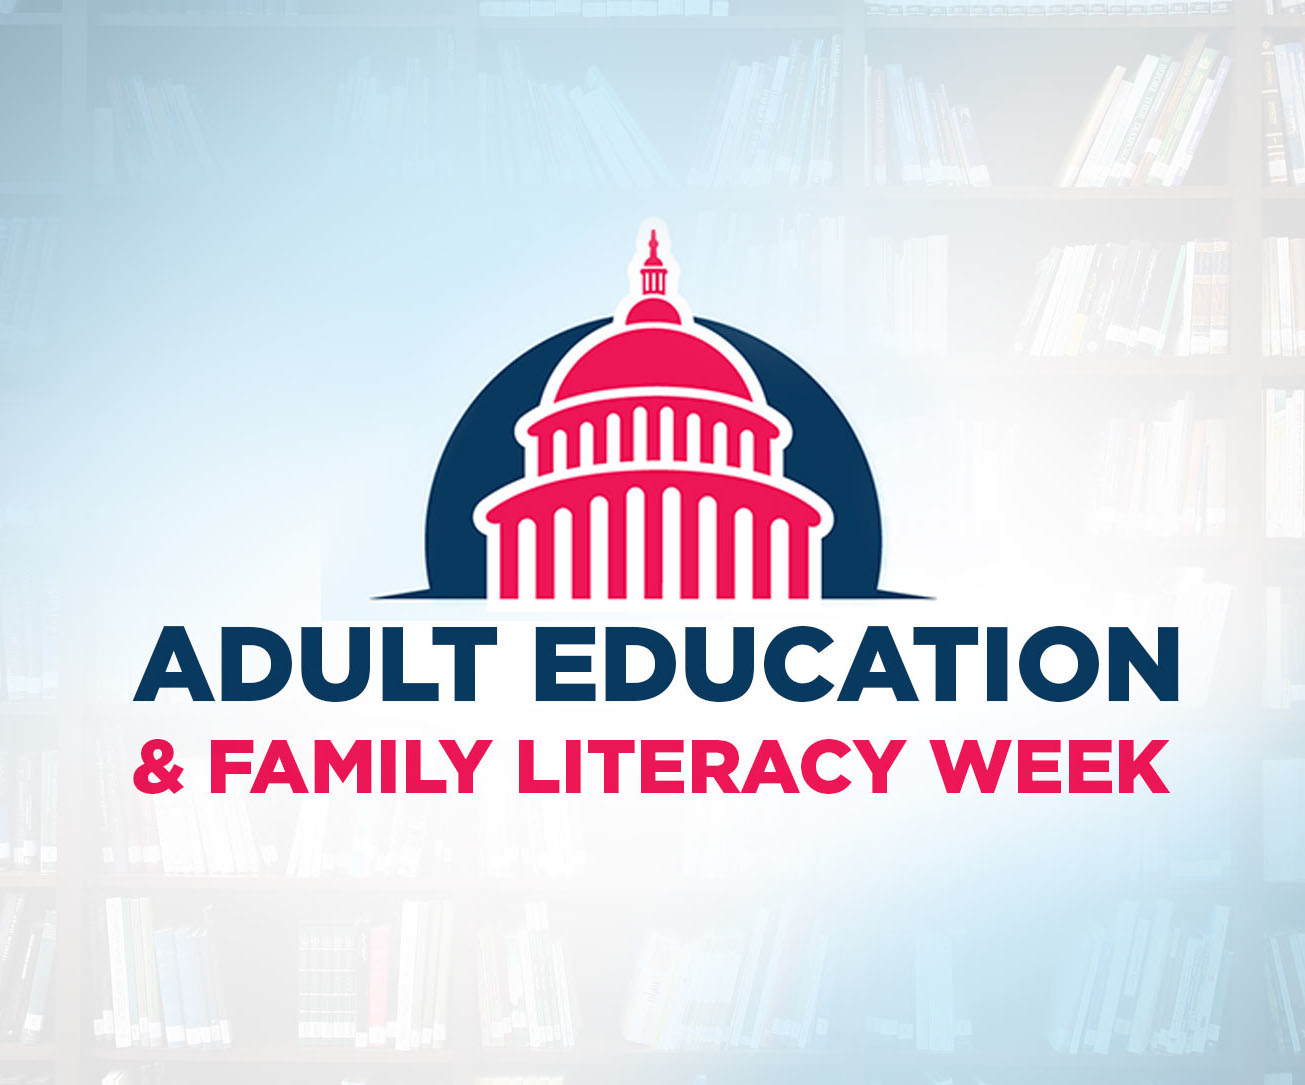 Holmes plans to celebrate National Adult Education and Family Literacy Week